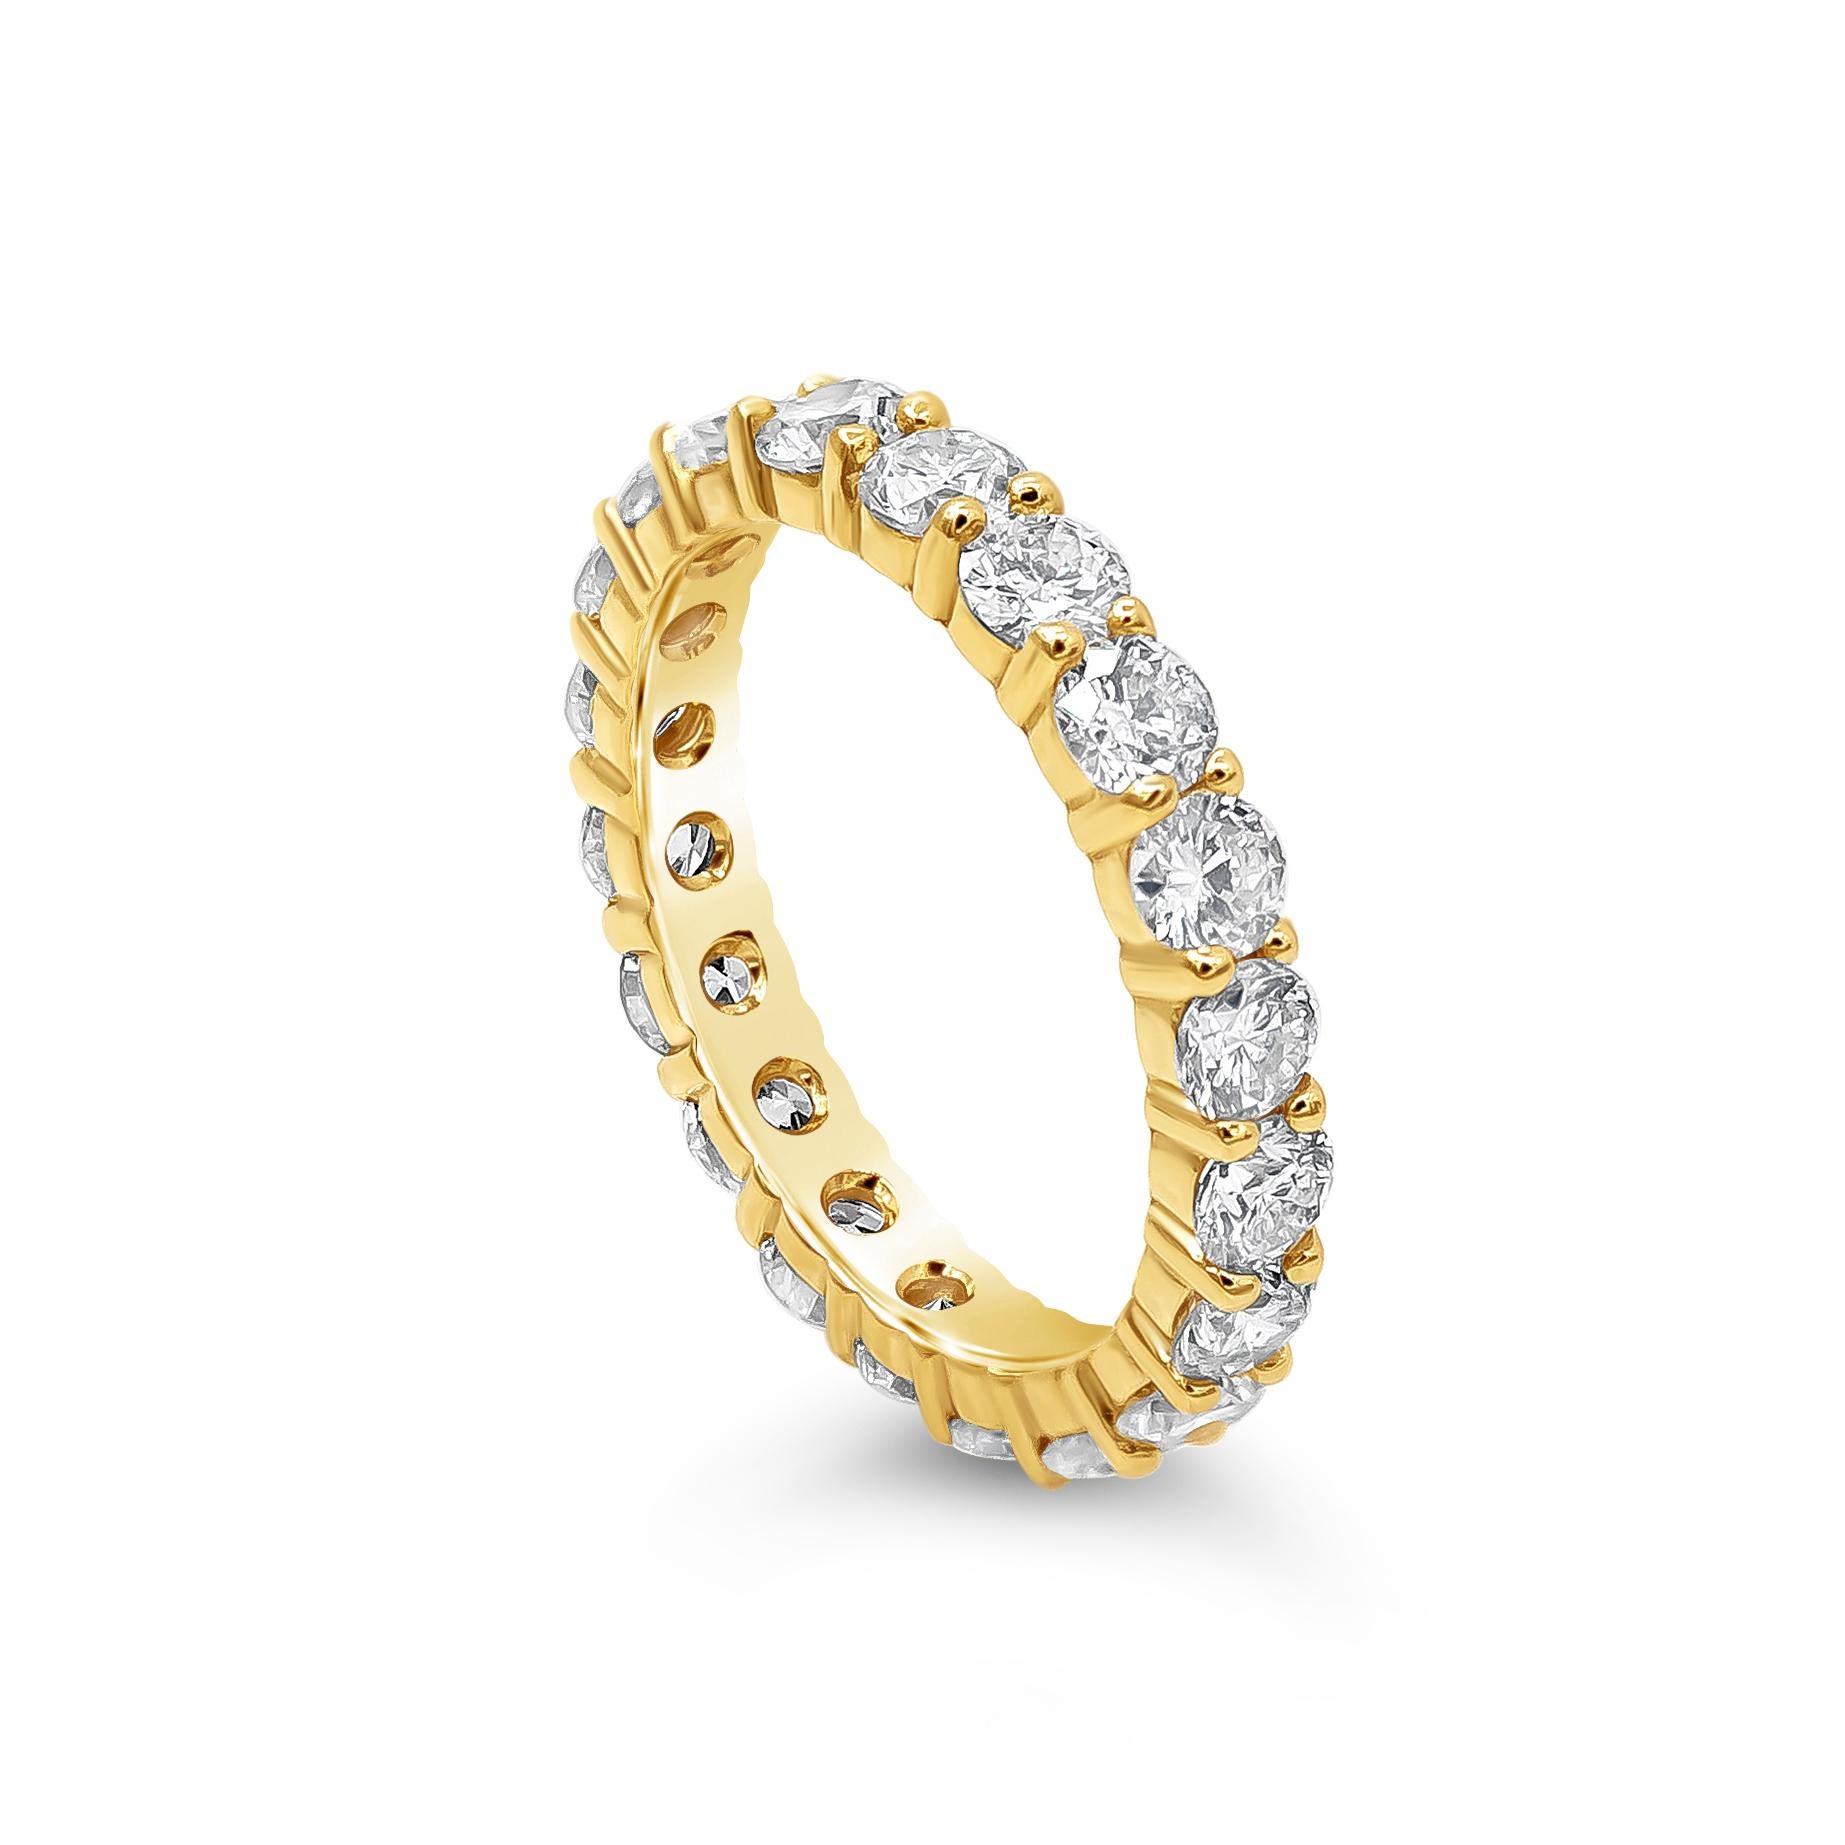 A classic eternity wedding band showcasing 20 round brilliant diamonds weighing 2.46 carats total, H Color and SI2-SI3 in Clarity. Set in a double shared prong setting and Made in 18K Yellow Gold, Size 6.5 US resizable upon request.

Style available